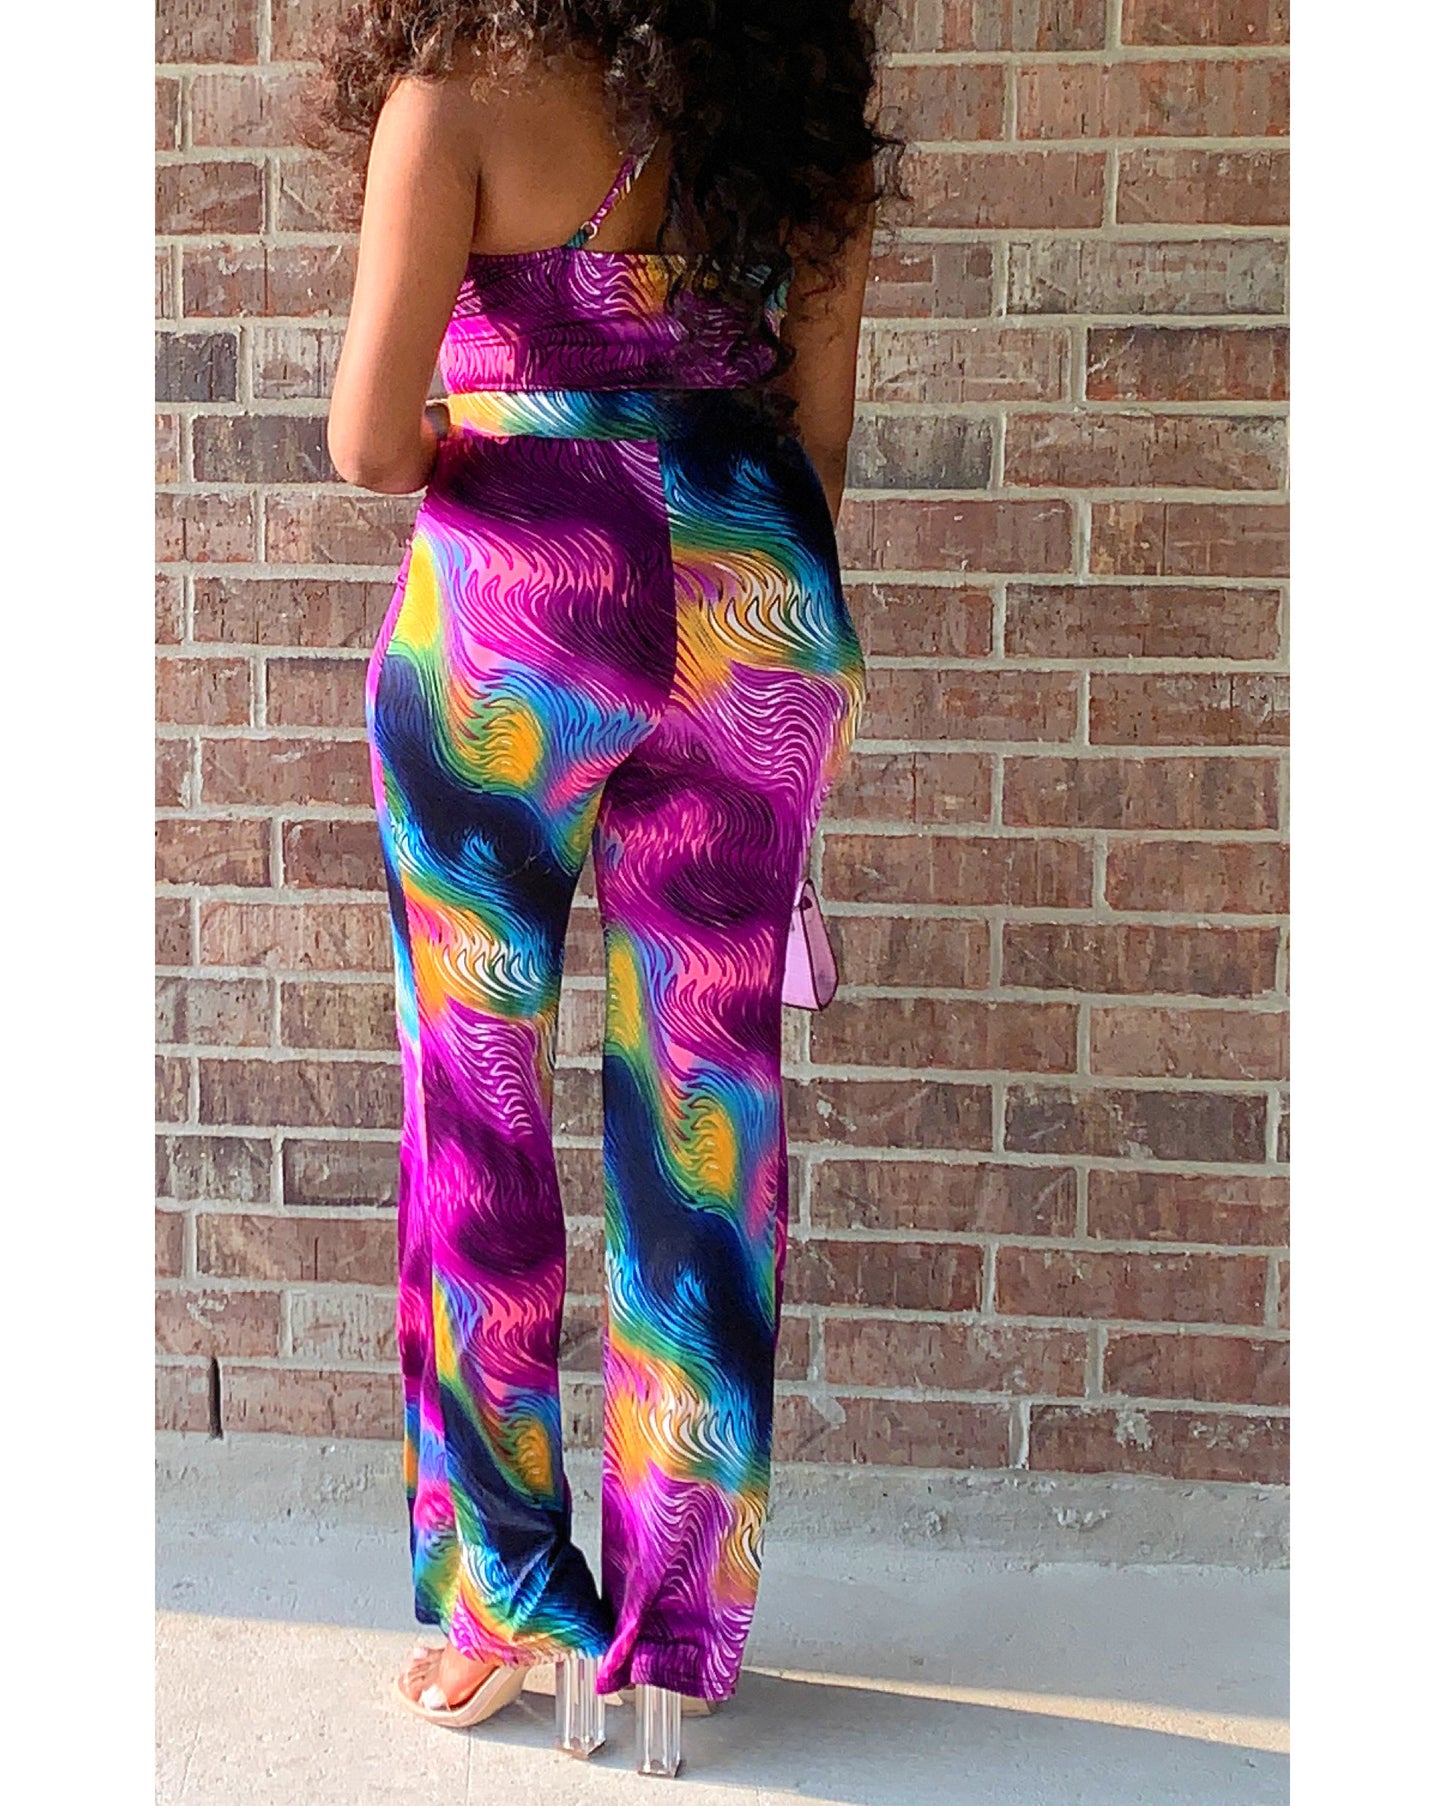 Abstract Attraction Jumpsuit